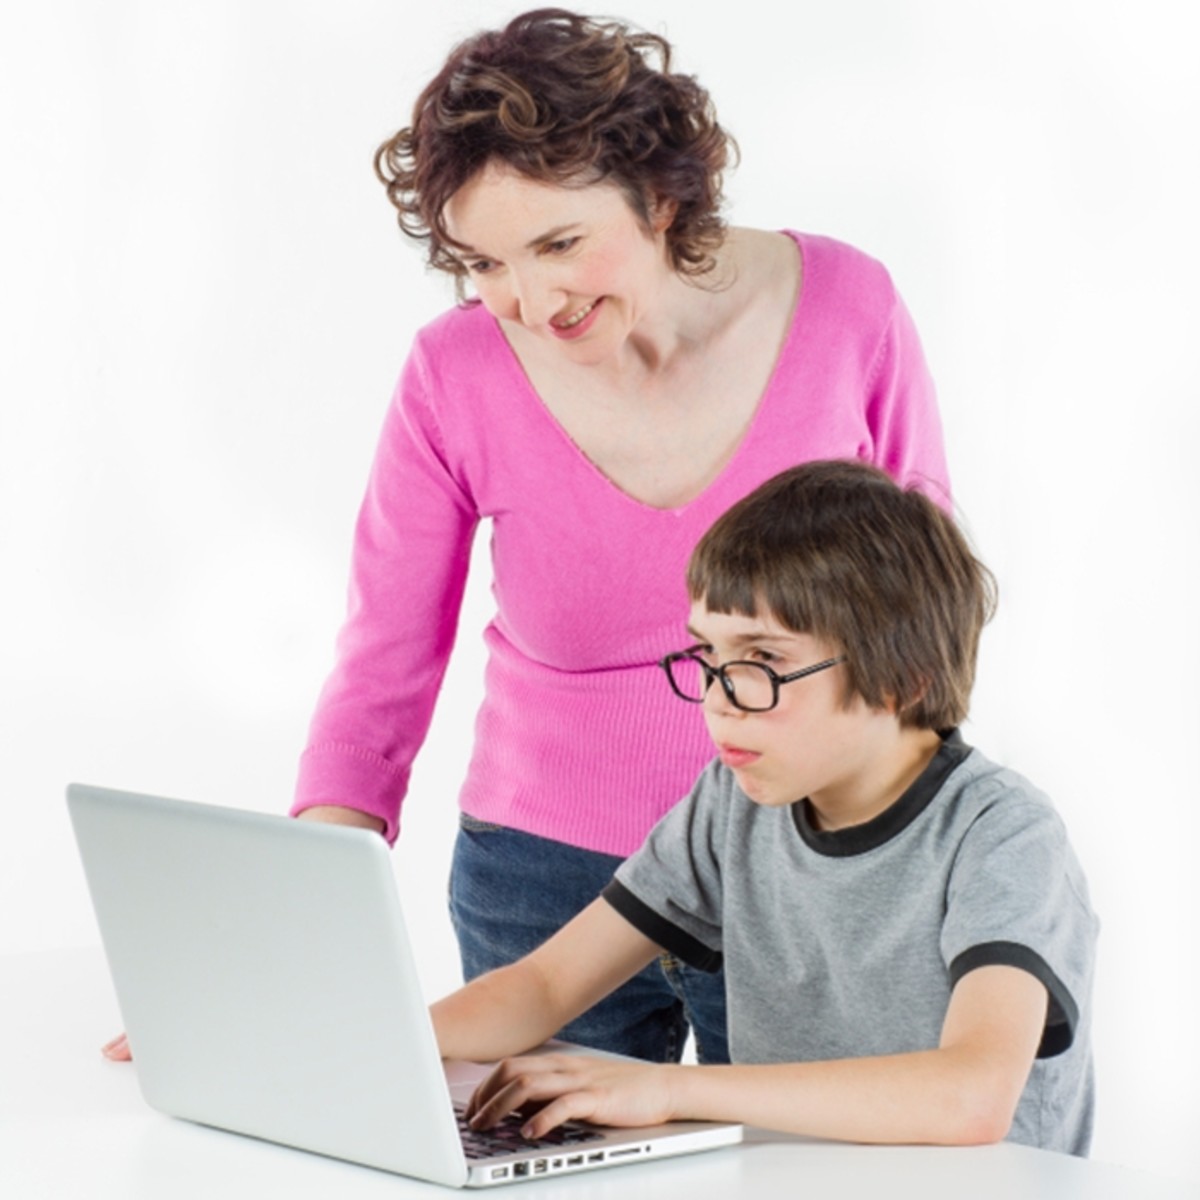 Online resources can be invaluable in helping your child read